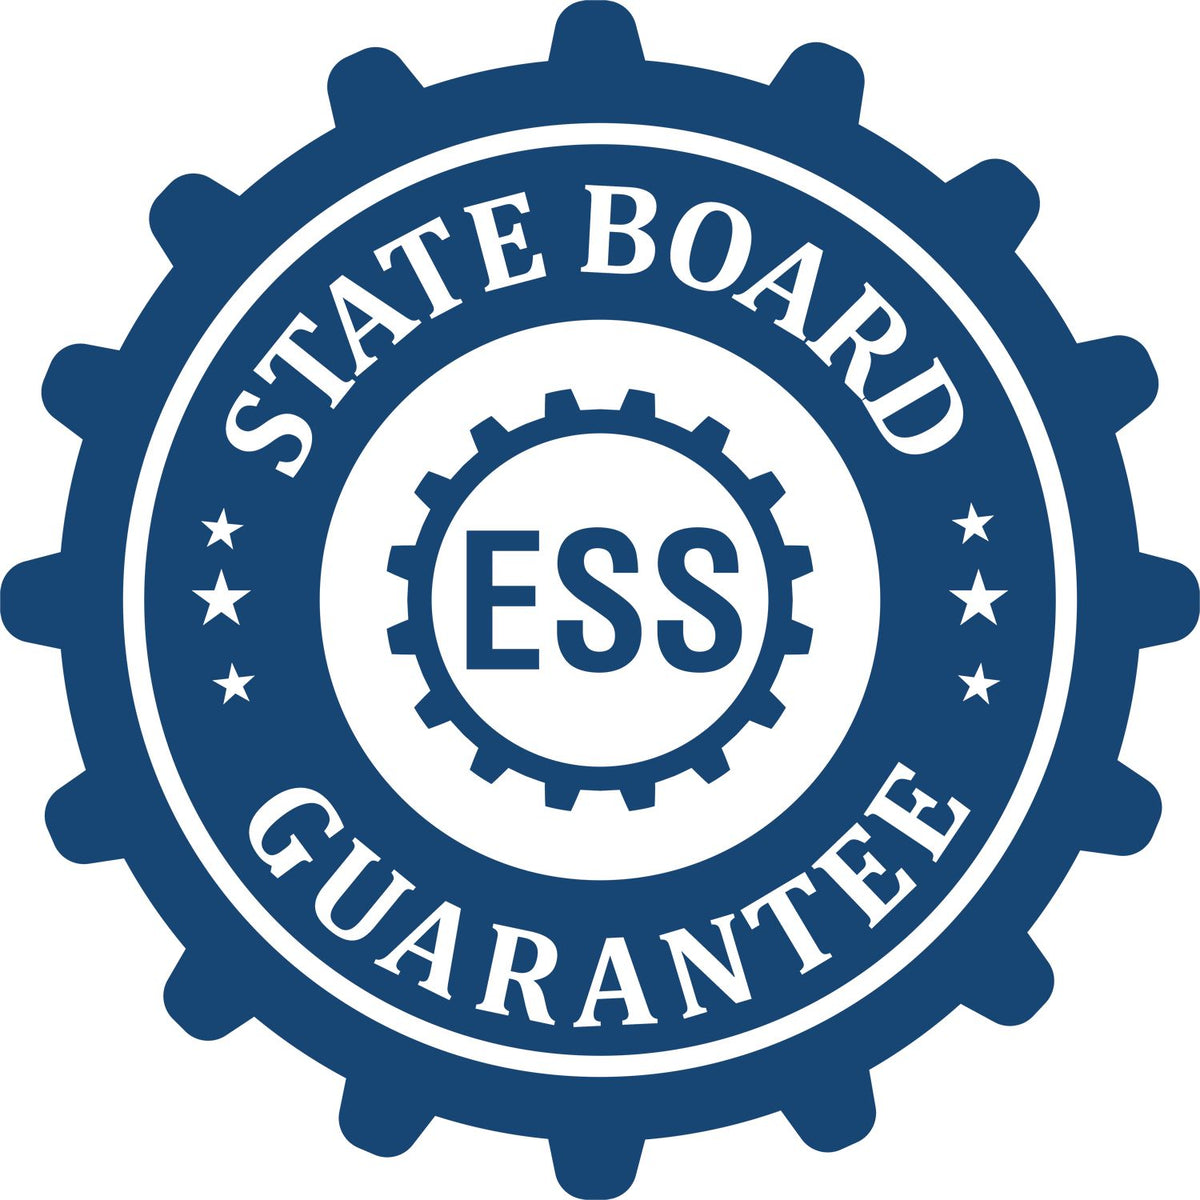 An emblem in a gear shape illustrating a state board guarantee for the Heavy Duty Cast Iron Alabama Architect Embosser product.